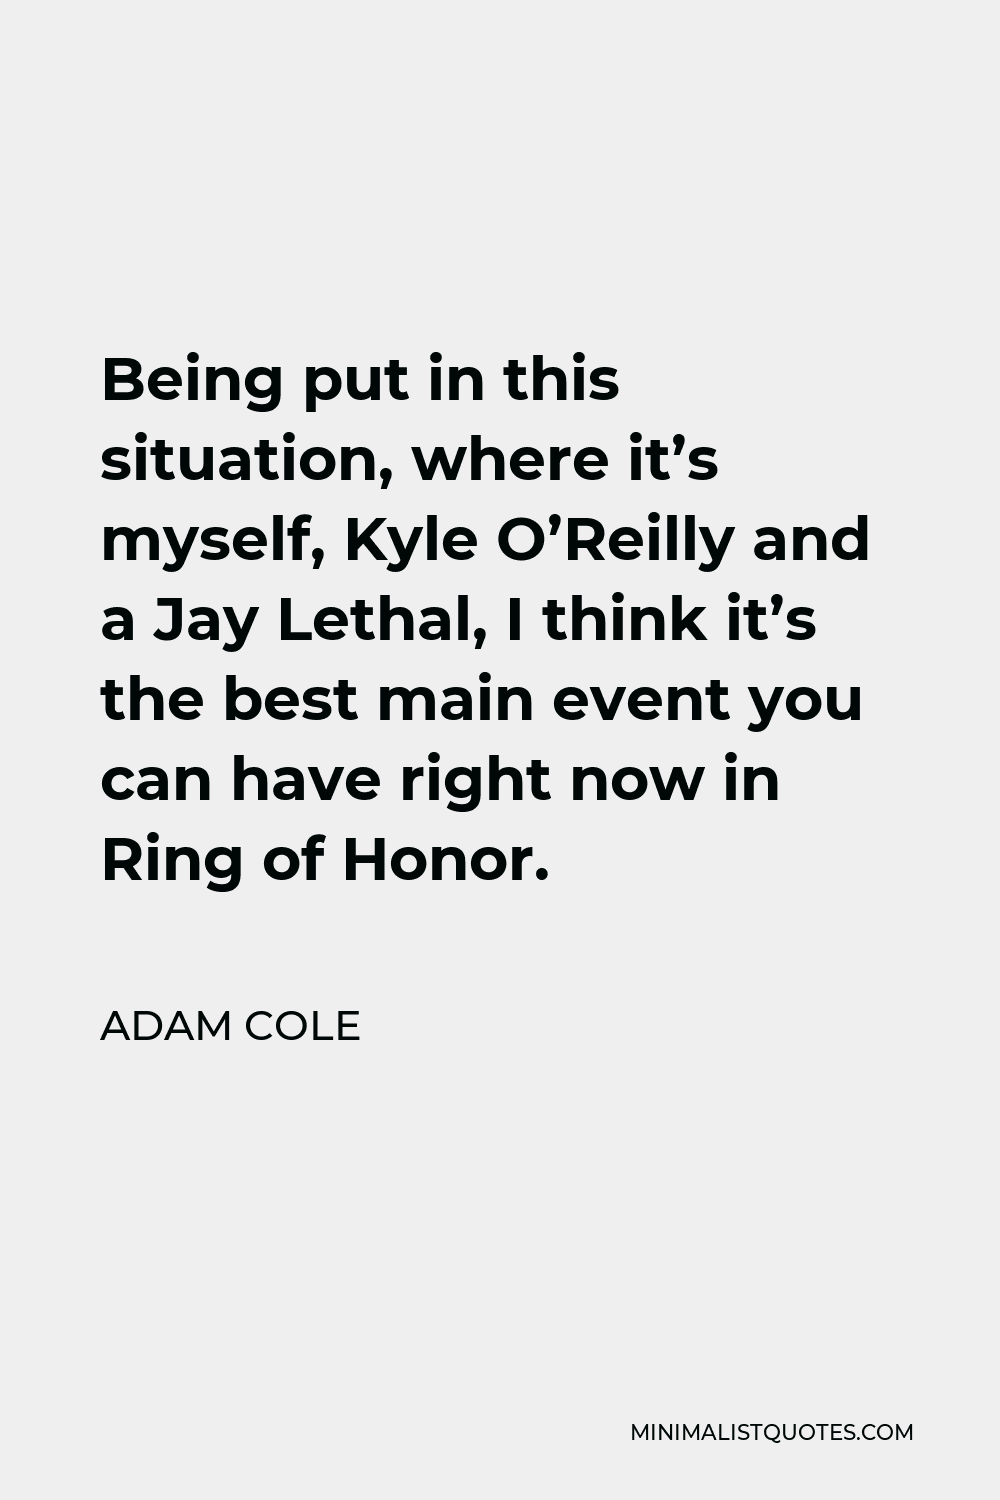 Adam Cole Quote - Being put in this situation, where it’s myself, Kyle O’Reilly and a Jay Lethal, I think it’s the best main event you can have right now in Ring of Honor.